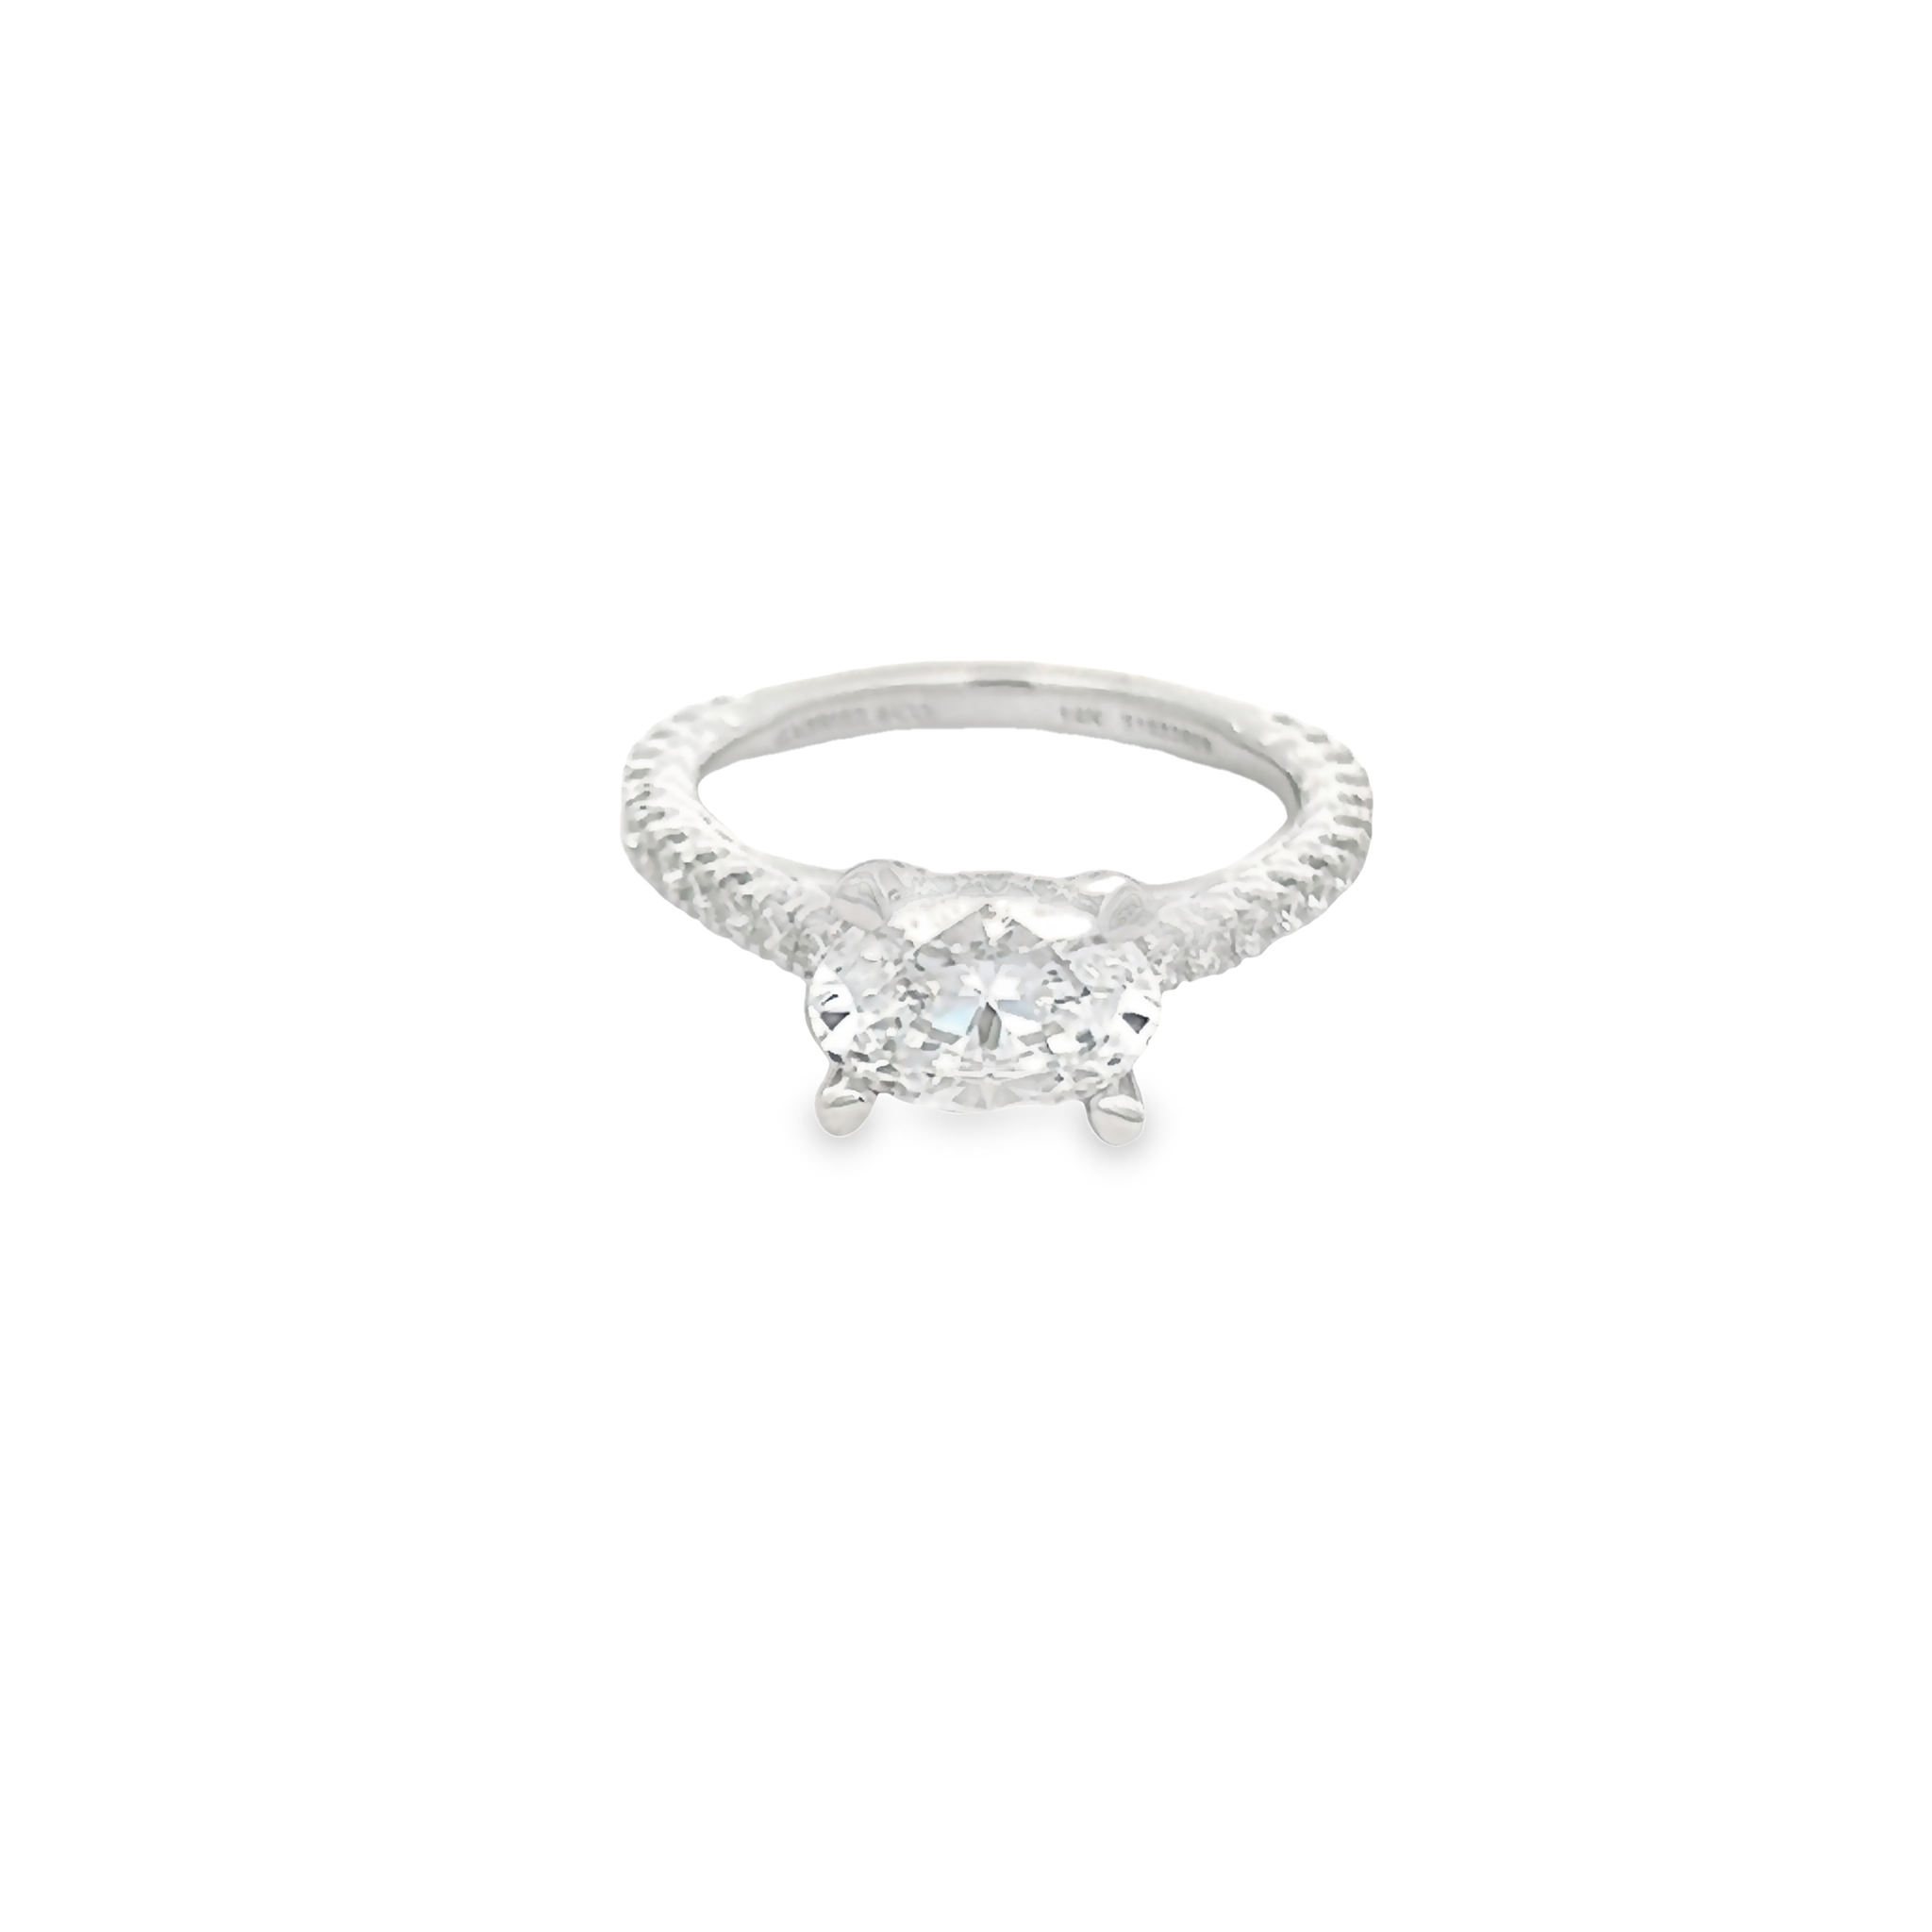 14 Karat White Gold East West Semi Mount Engagement Ring With 52=0.57 Total Weight Round Brilliant G Vs Diamonds. Size 6.25